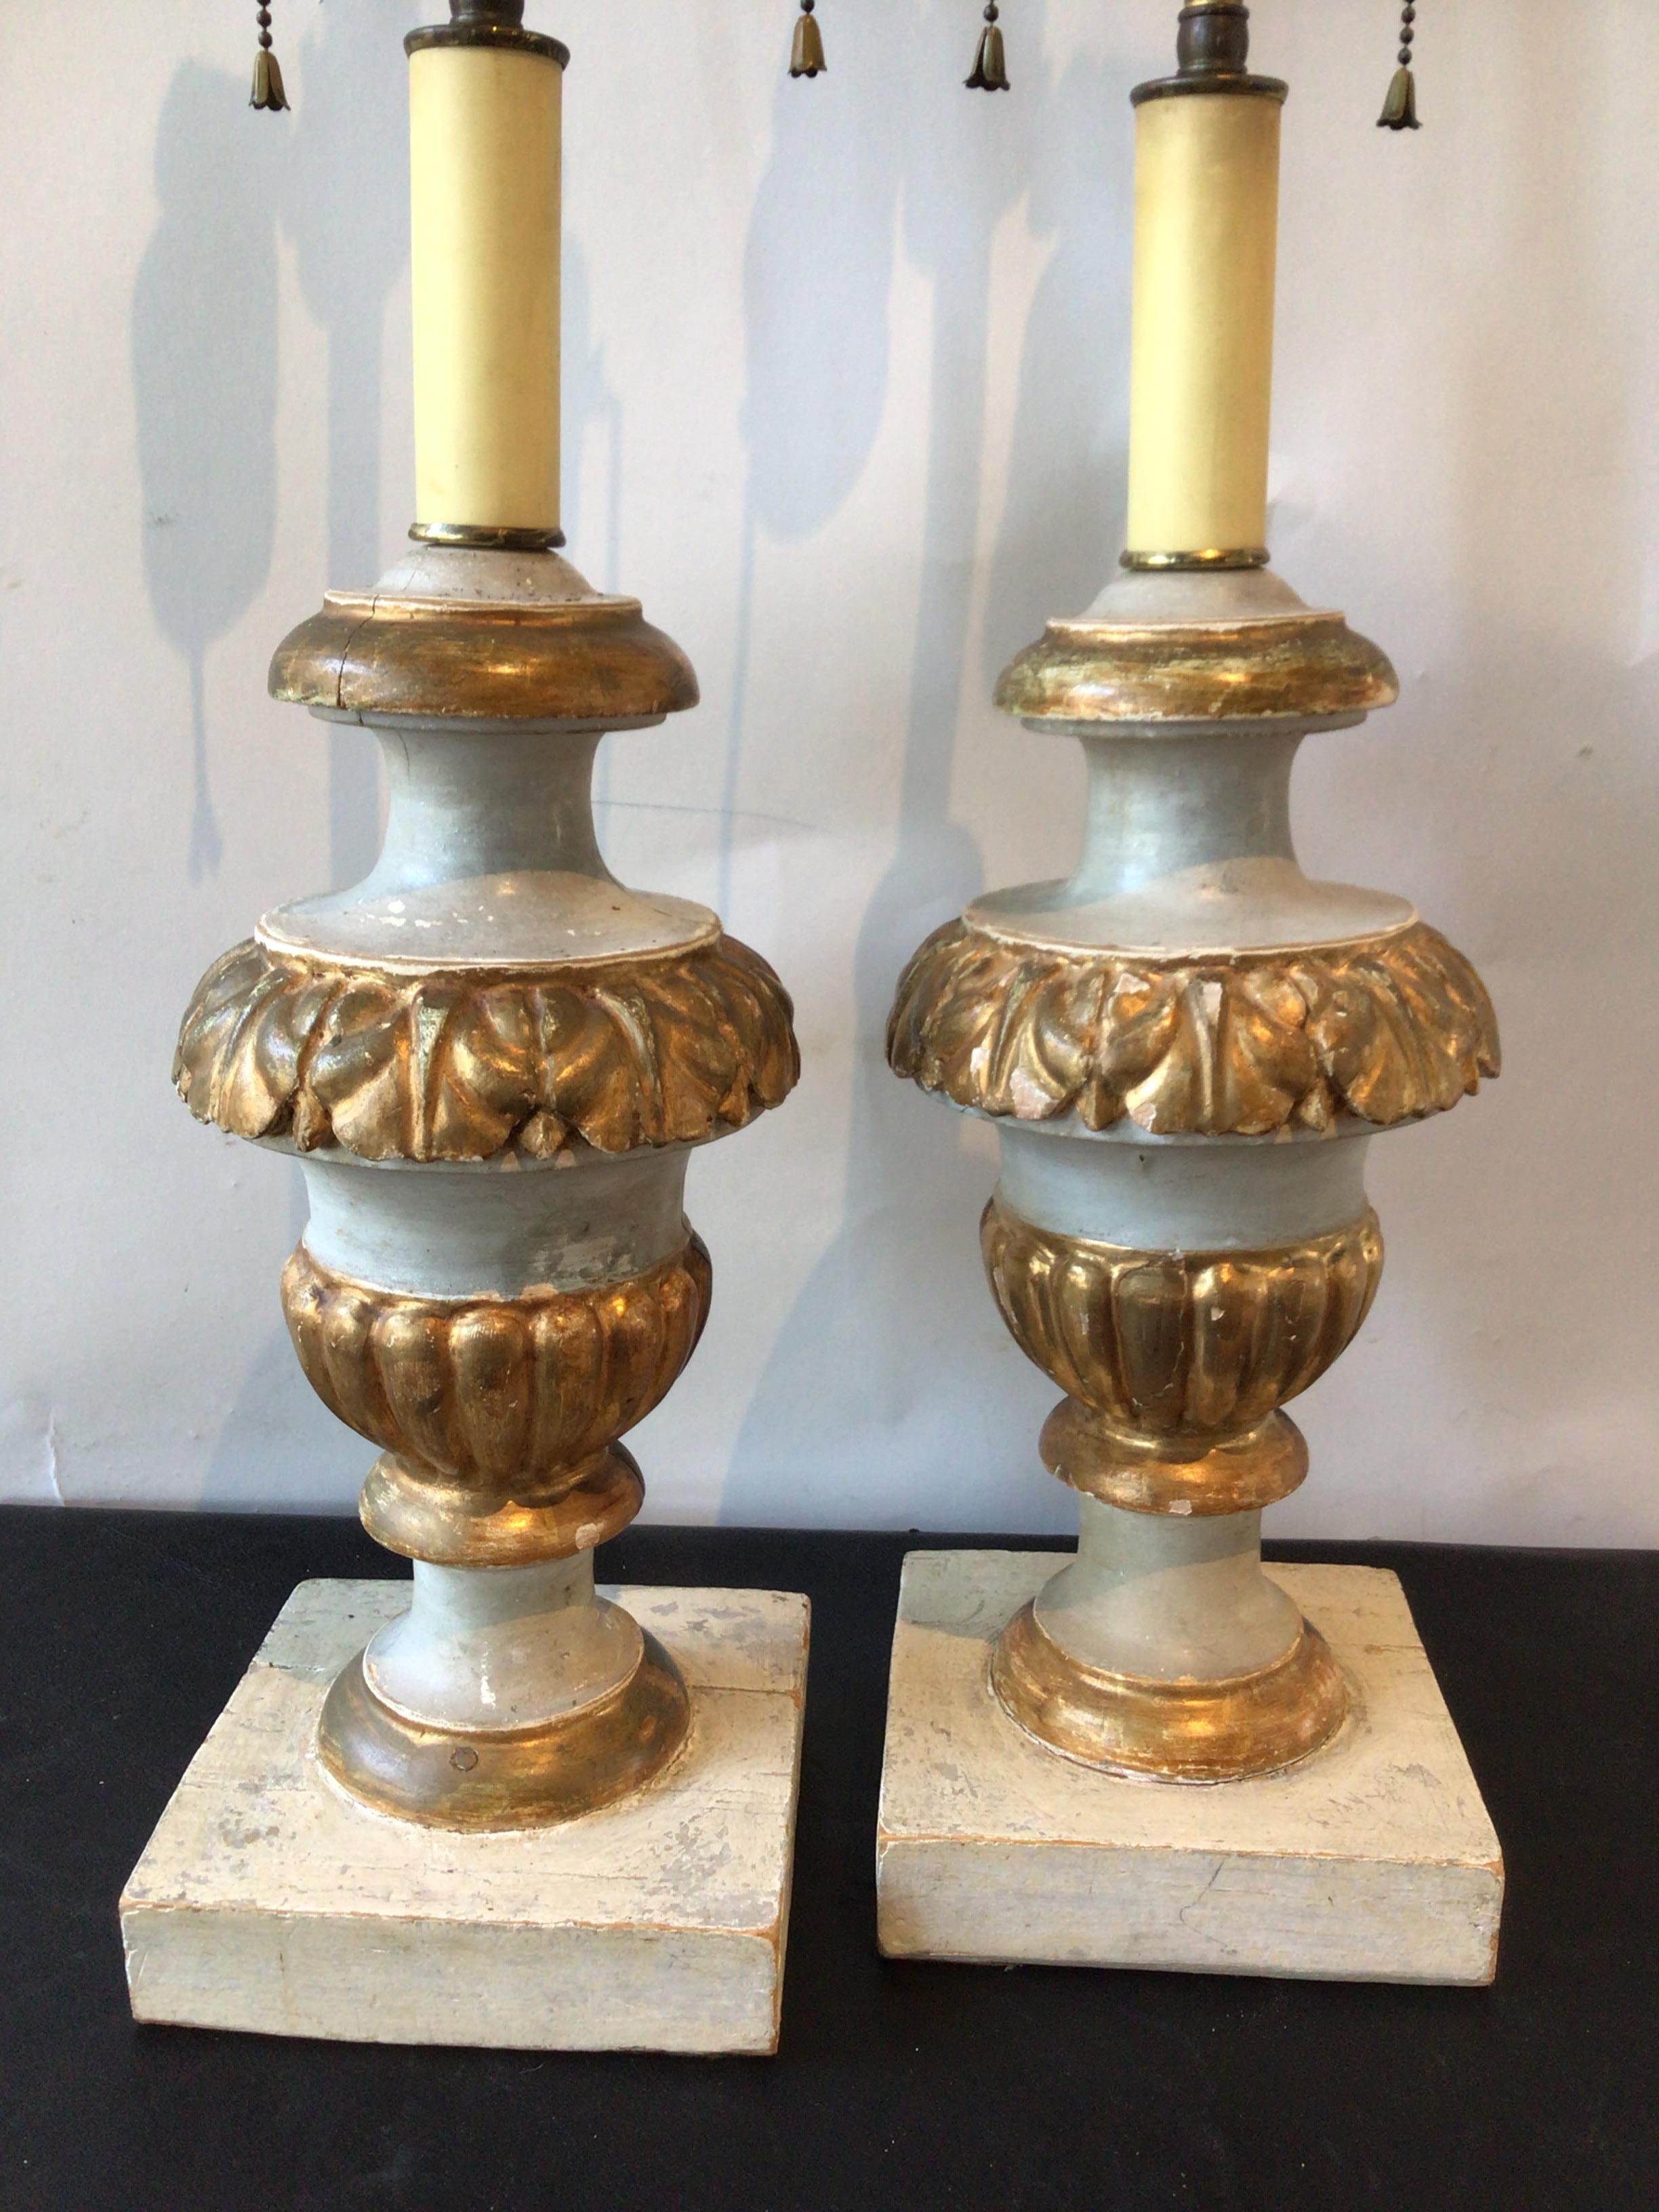 Pair of 1850s Italian gilt wood lamps. Wood is painted a light grey.